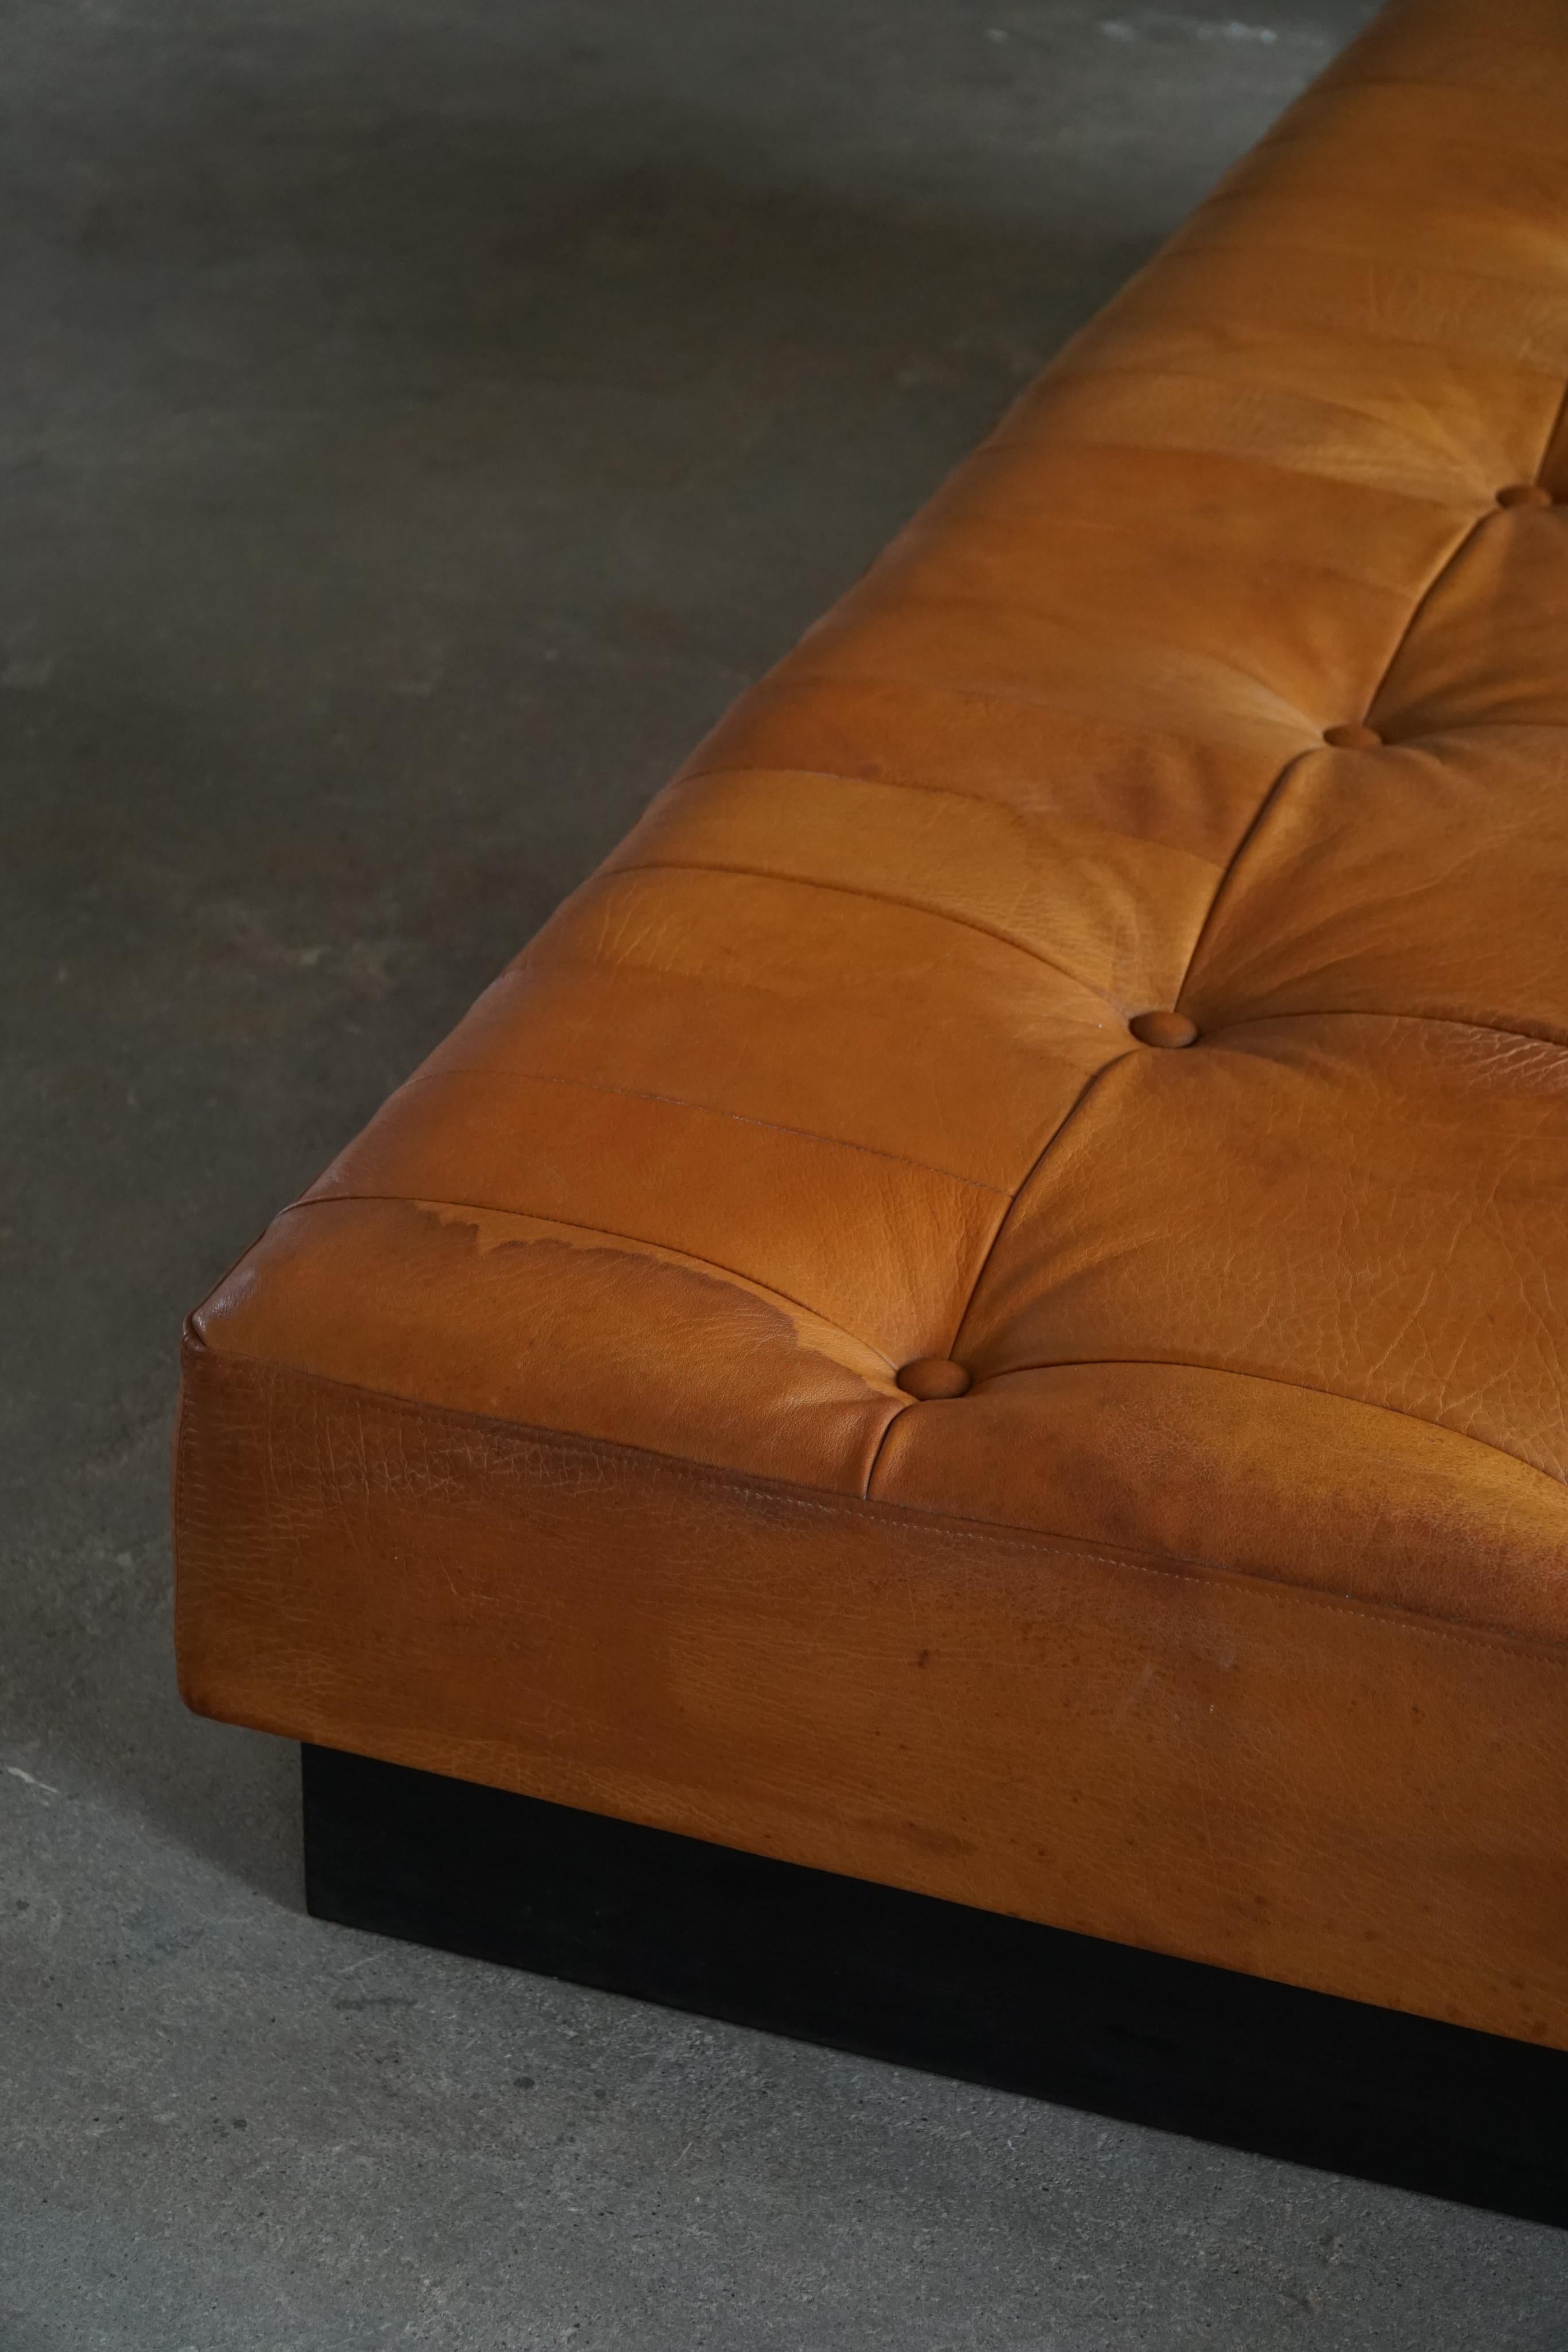 Scandinavian Modern Danish Mid-Century Modern Daybed/Sofa in Cognac Brown Leather, Made in 1960s